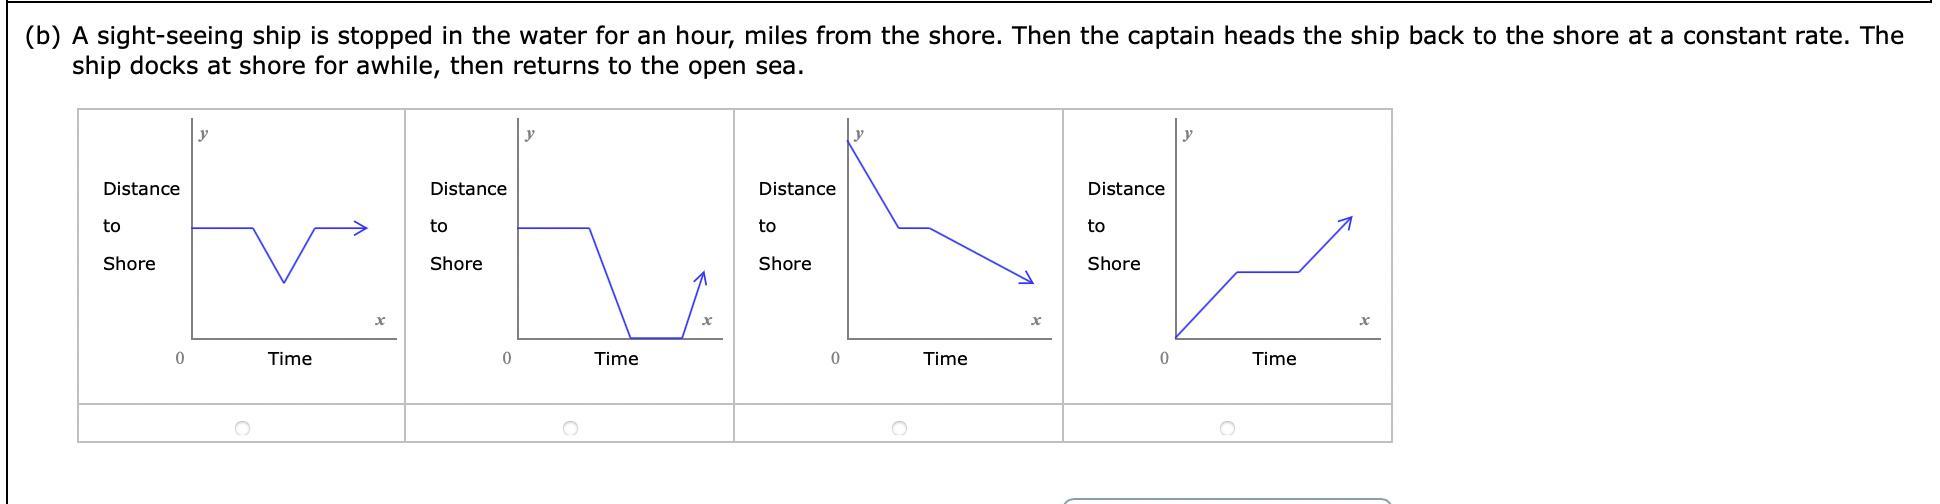 (b)A Sight-seeing Ship Is Stopped In The Water For An Hour, Miles From The Shore. Then The Captain Heads